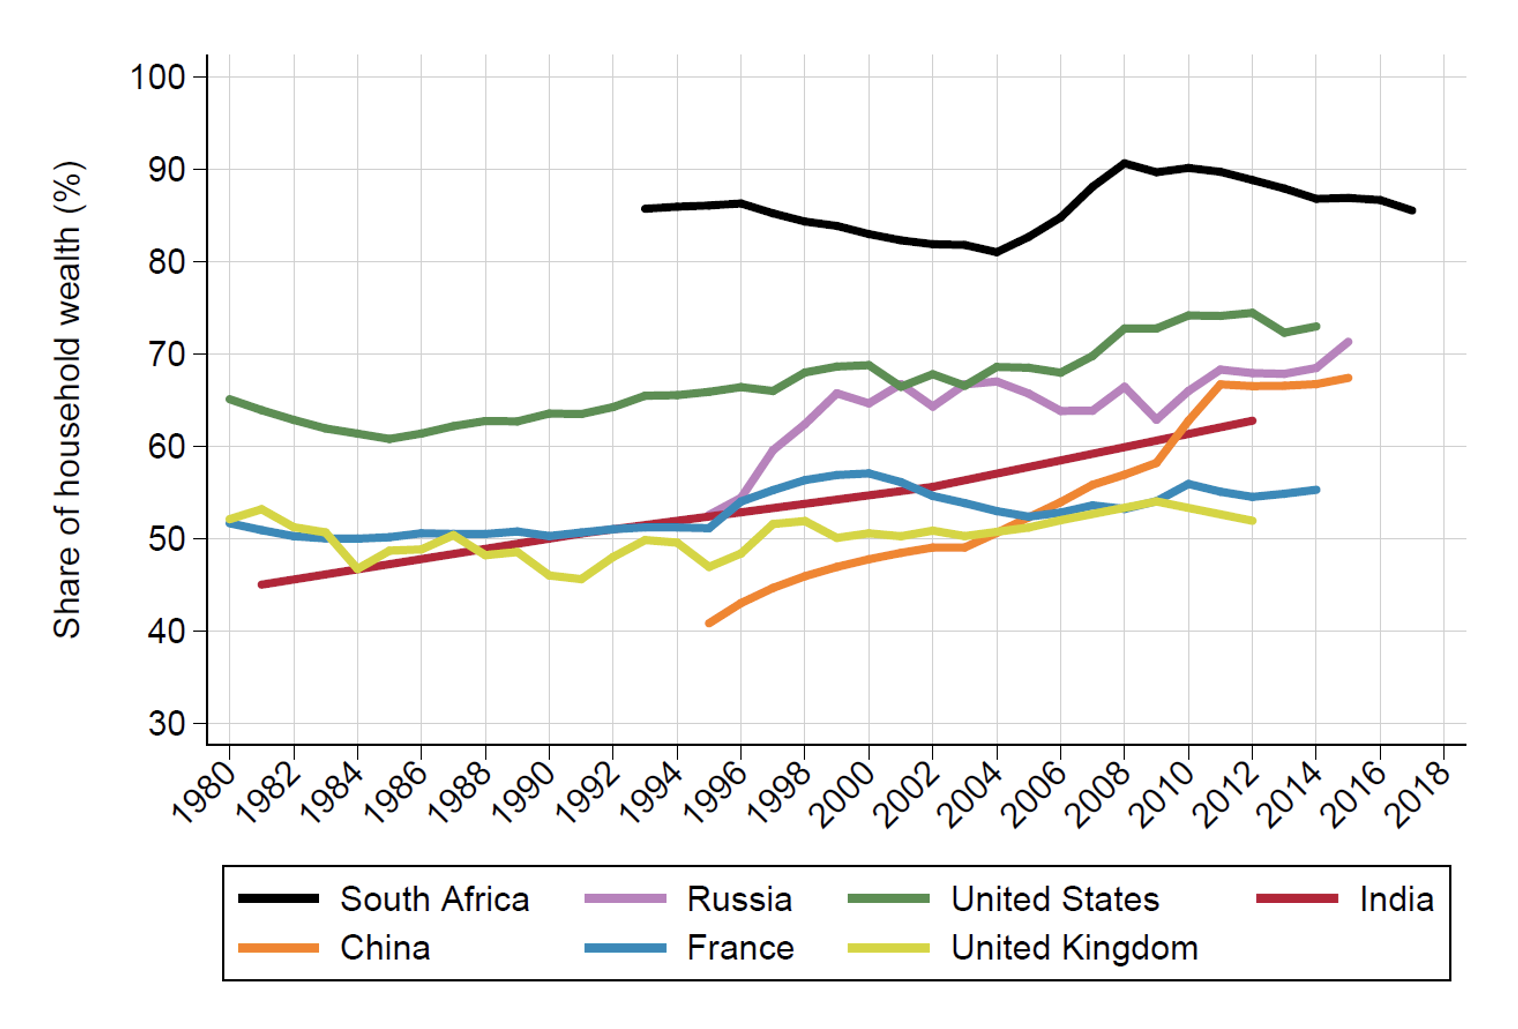 Wealth Inequality in South Africa in Comparative Perspective: Evolution of the Top 10% Wealth Share in Selected Countries, 1980-2017